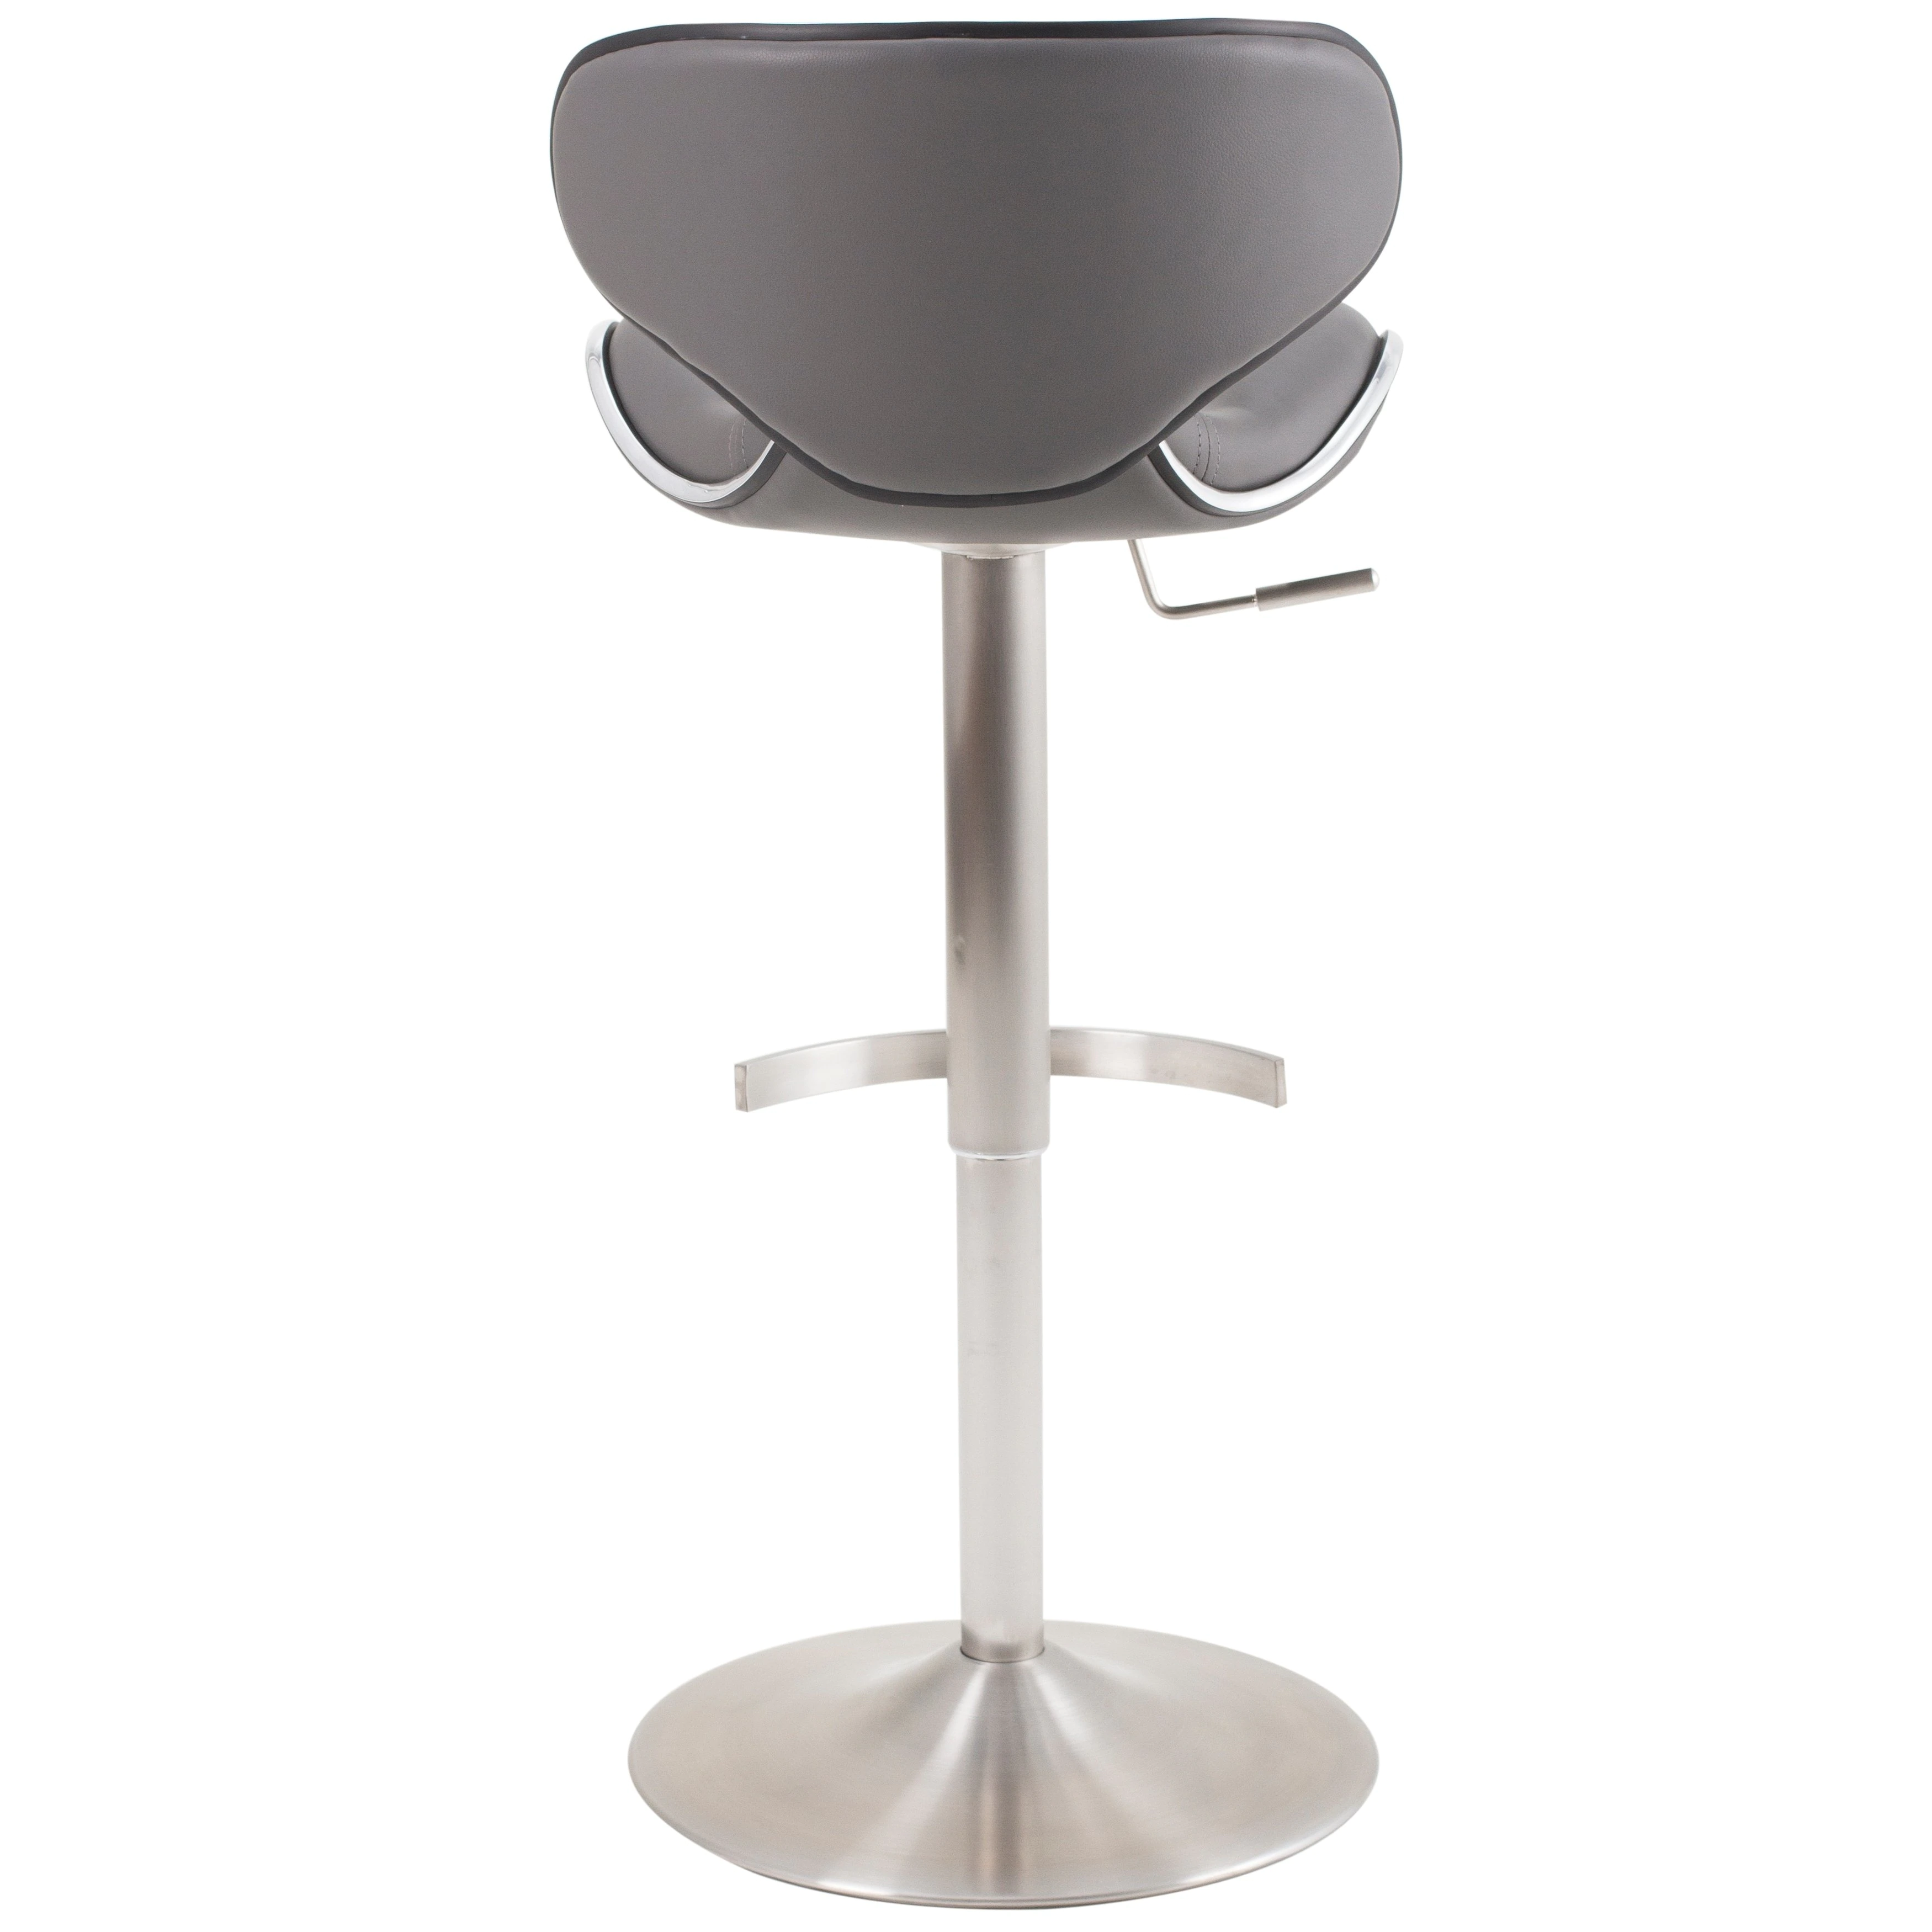 mix brushed stainless steel adjustable height swivel bar stool accent table free shipping today silver centerpieces for dining contemporary metal side tables mini lamp round